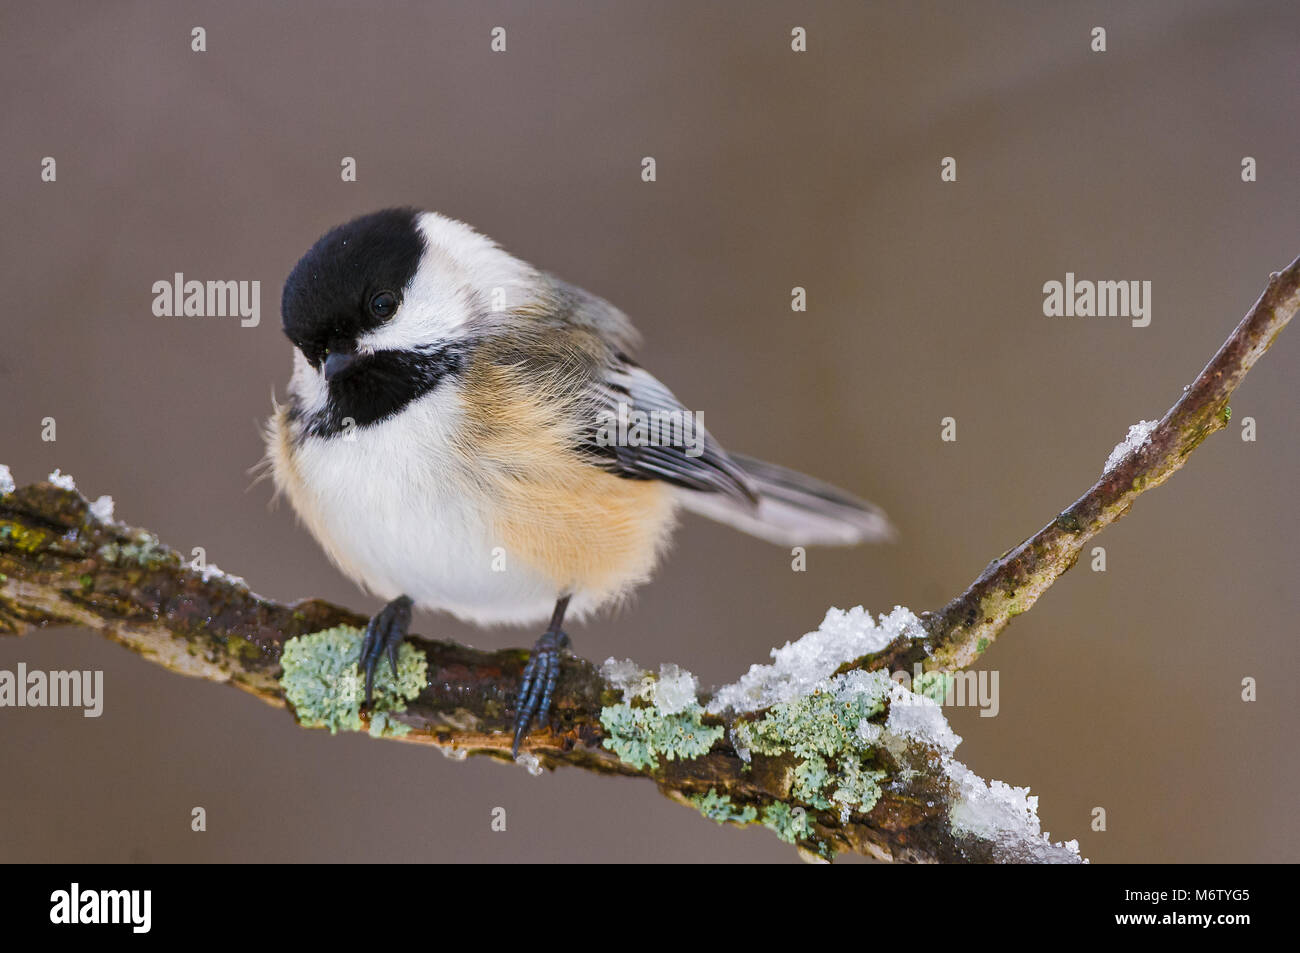 Black-capped Chickadee (Poecile atricapillus) on branch with lichen and snow Stock Photo